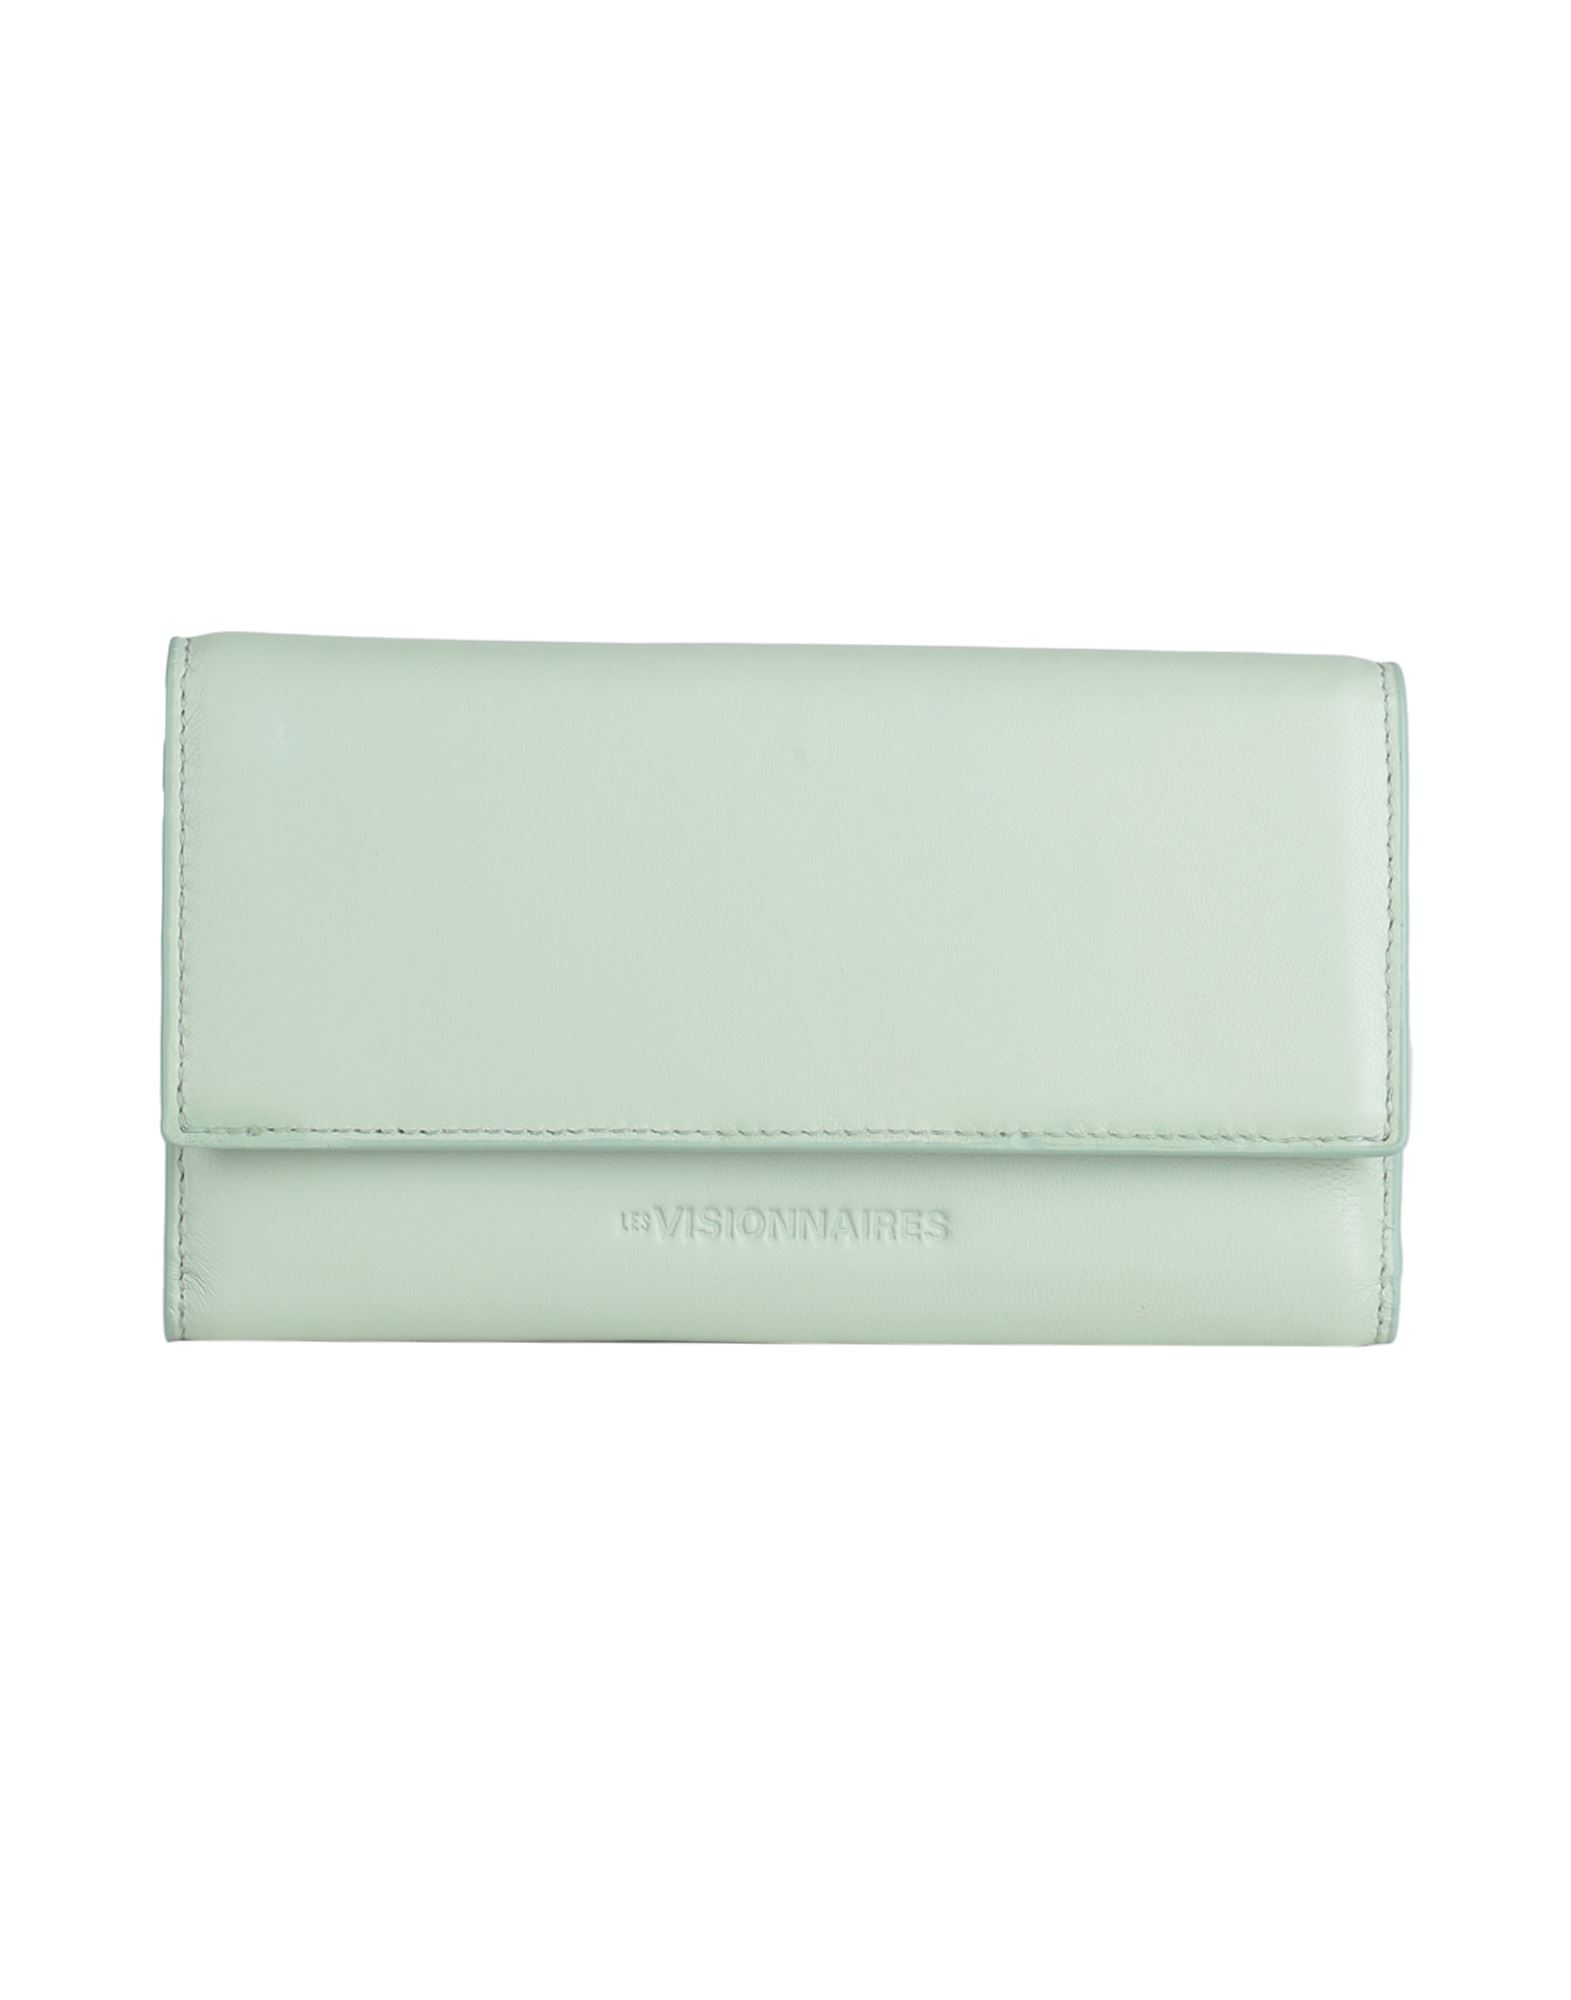 LES VISIONNAIRES LES VISIONNAIRES MAJA SILKY LEATHER WOMAN WALLET LIGHT GREEN SIZE - LAMBSKIN